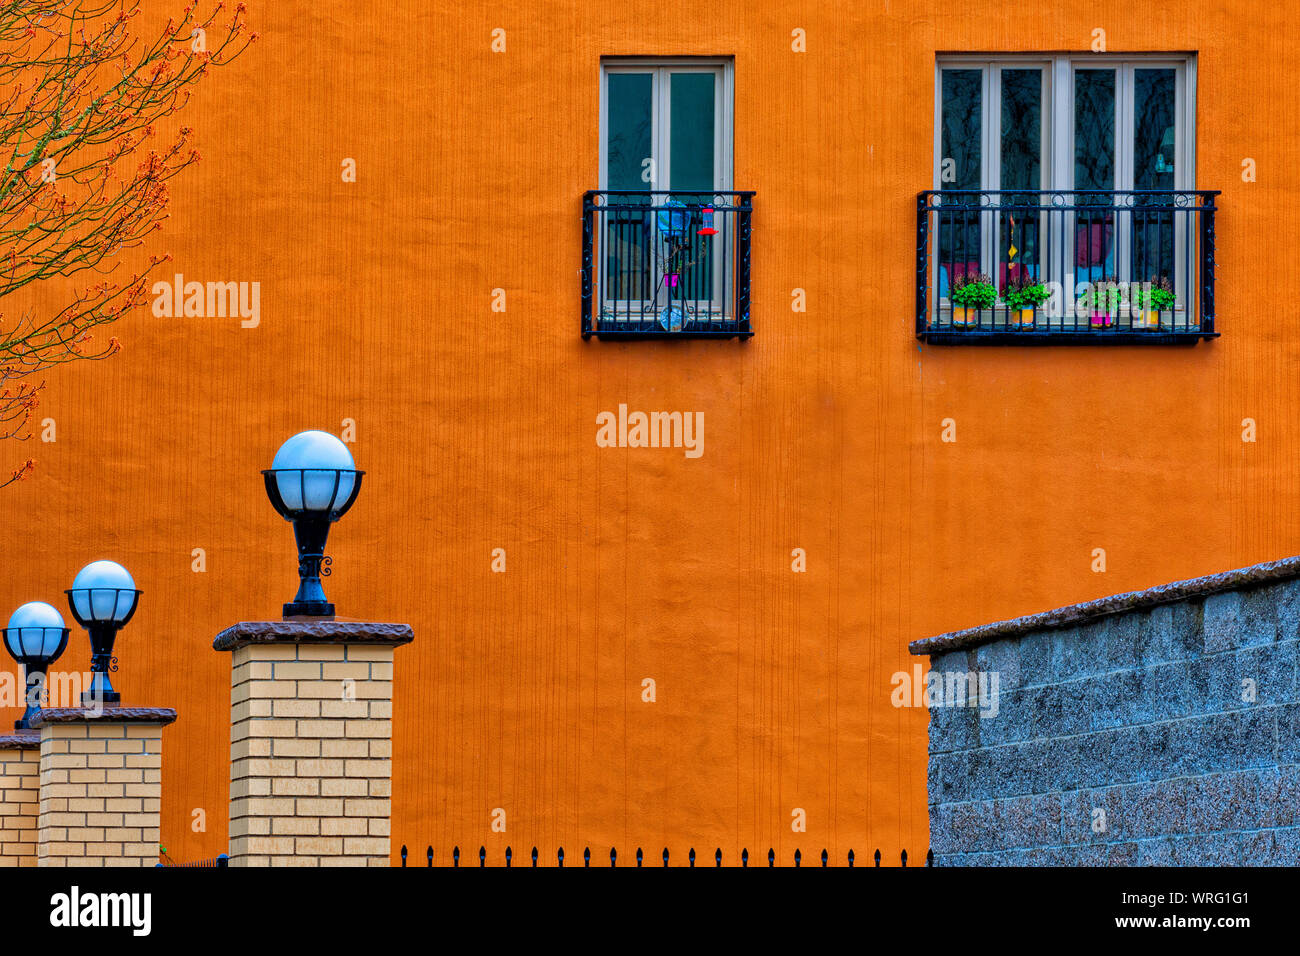 Abstract look of the side of a building with flower pots in window.  A row of brick post with lights on top and the top of an iron fencing. Stock Photo